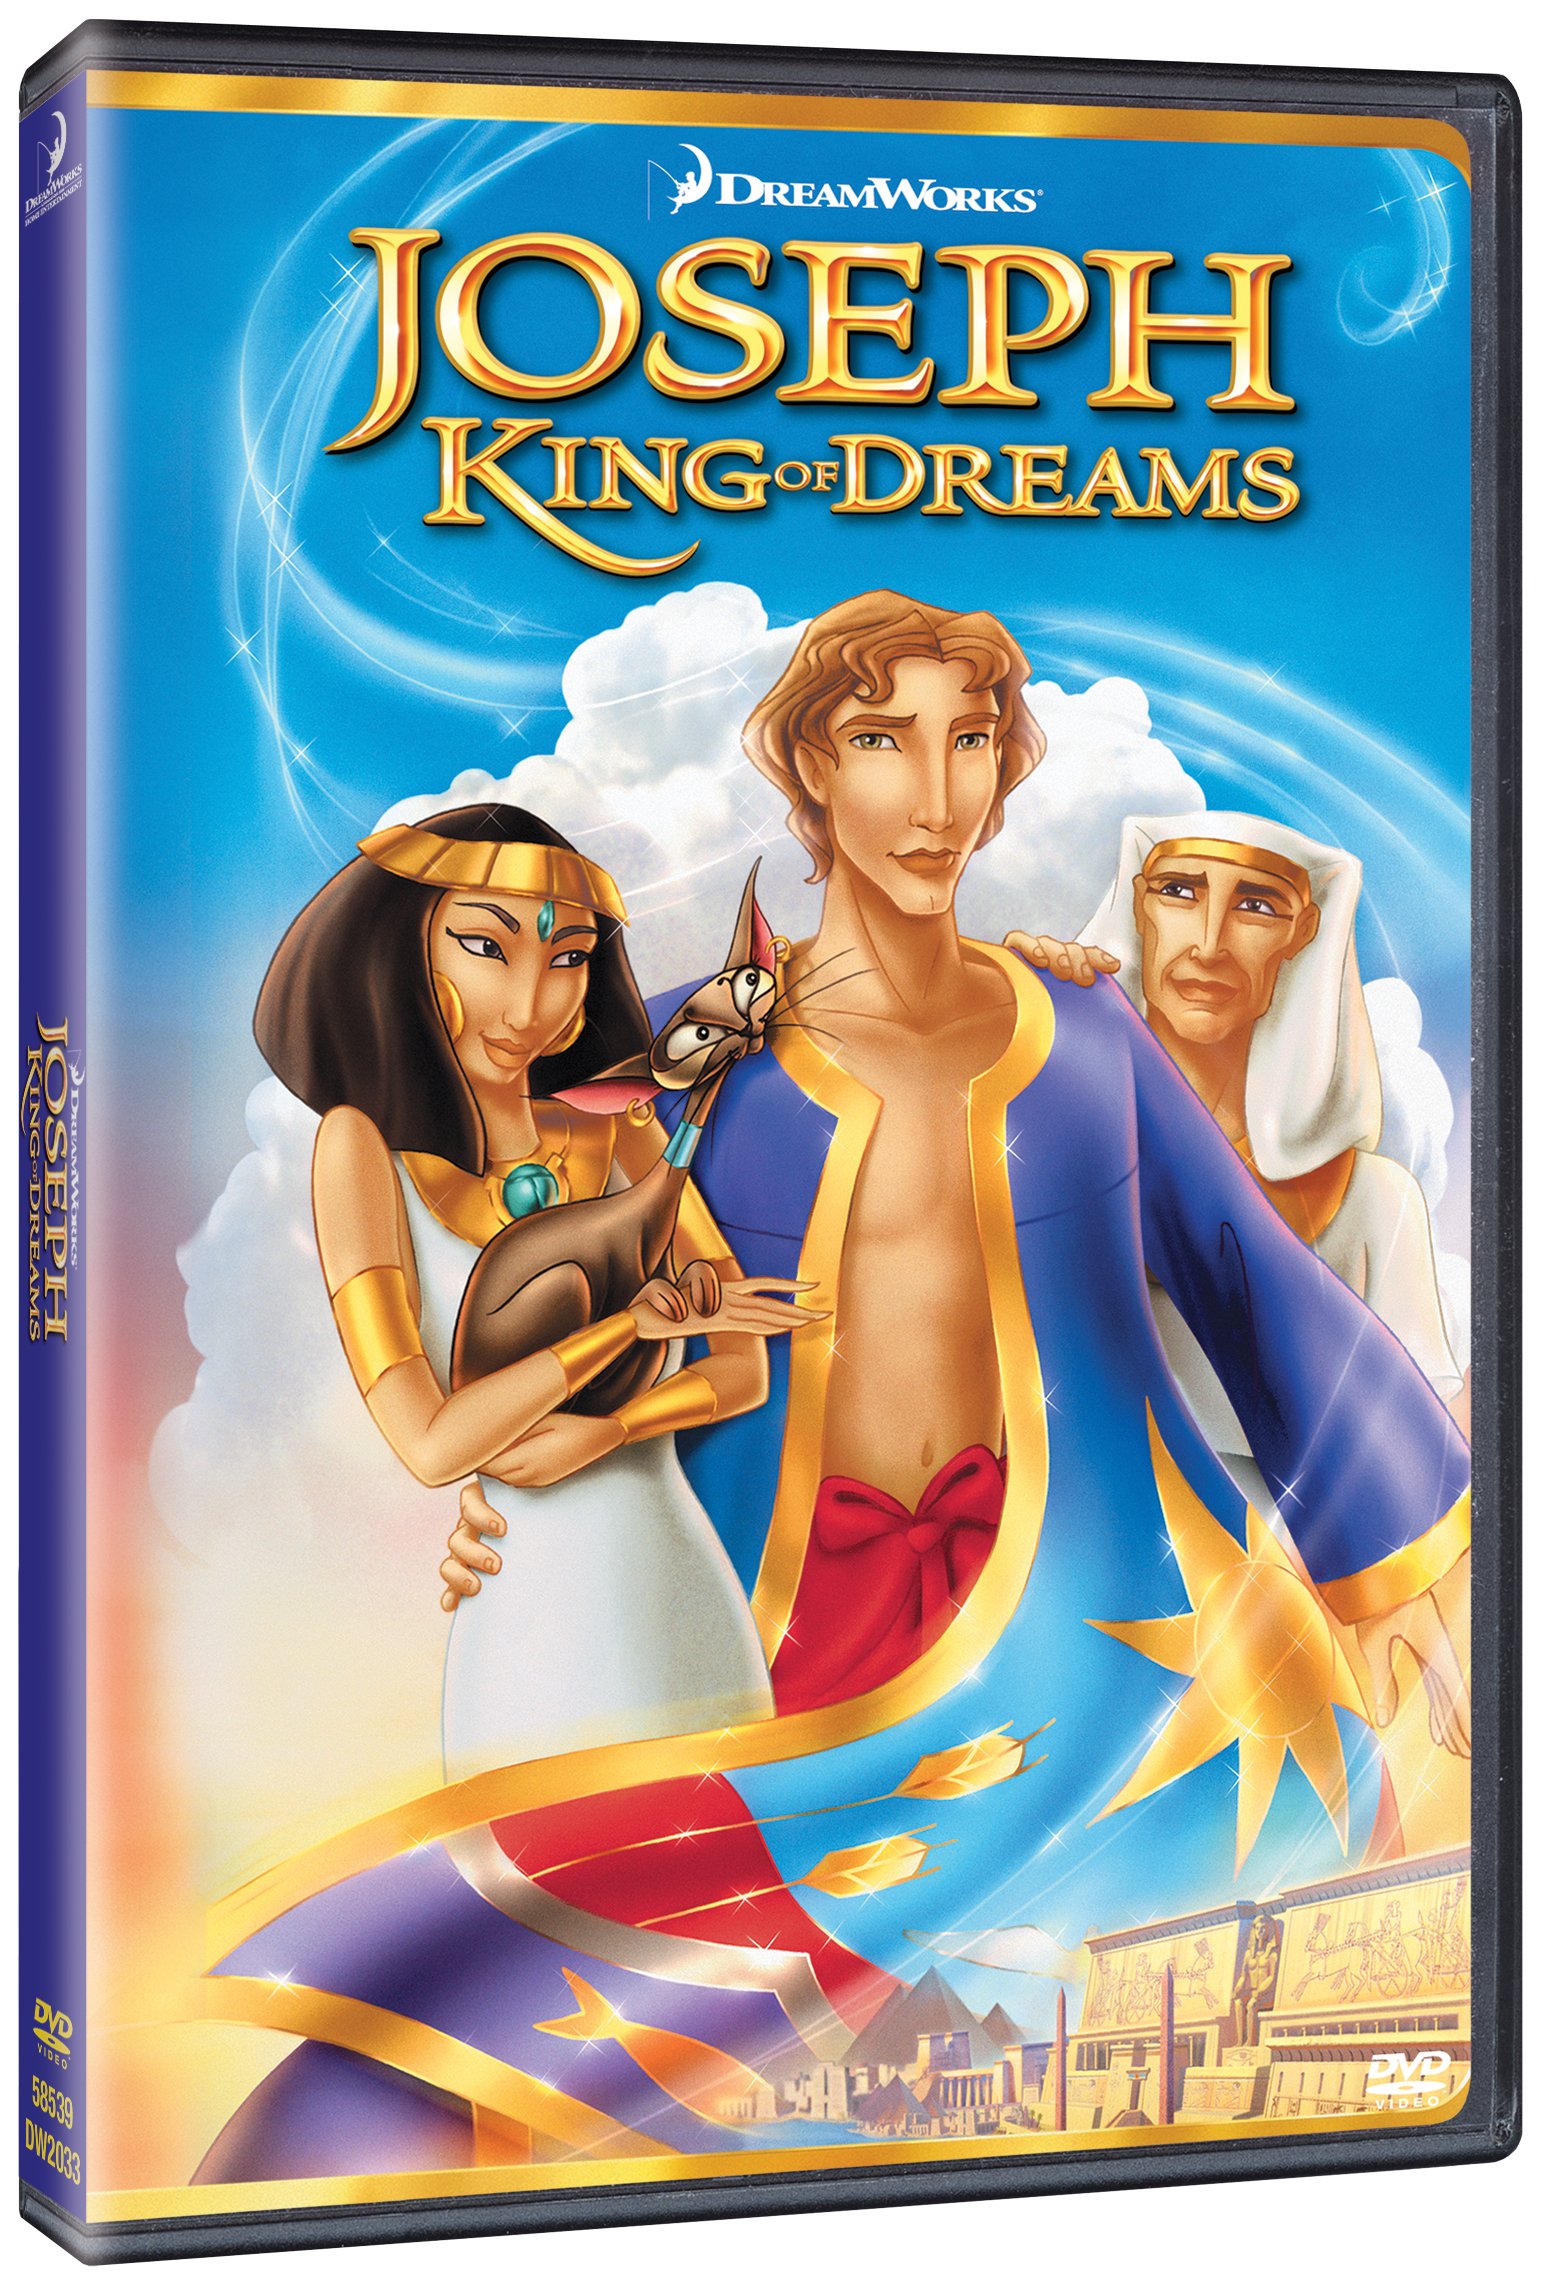 joseph-king-of-dreams-movie-purchase-or-watch-online